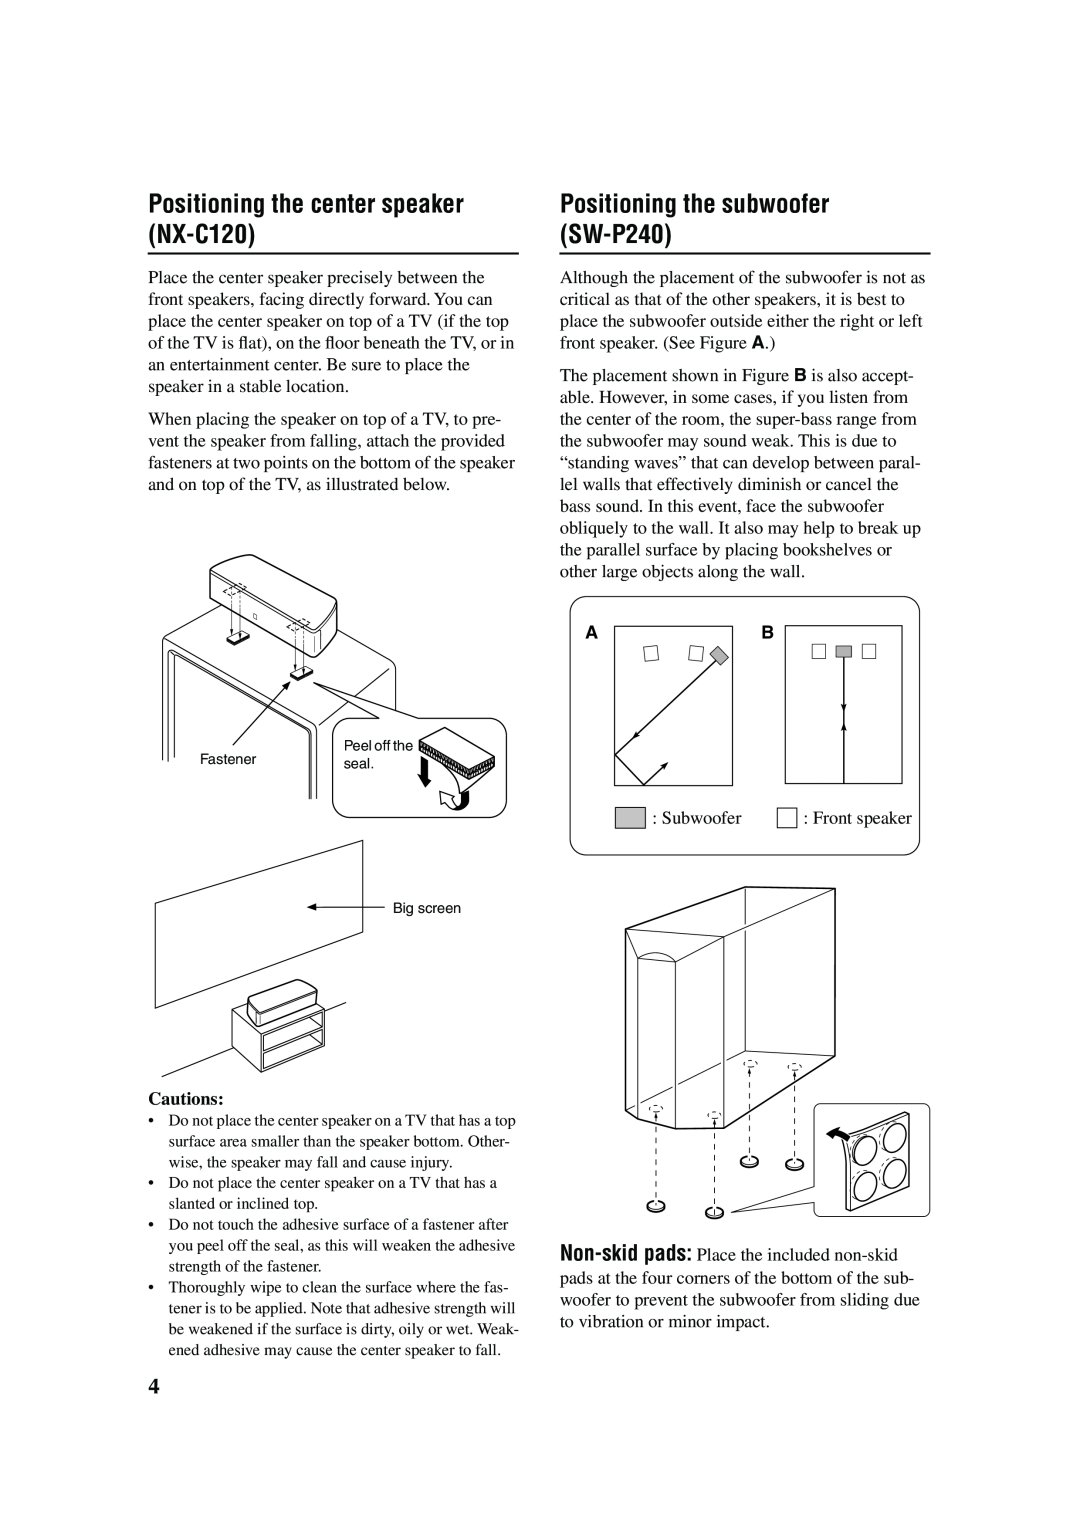 Yamaha RX-SL80 owner manual Positioning the center speaker NX-C120, Positioning the subwoofer SW-P240, Cautions 